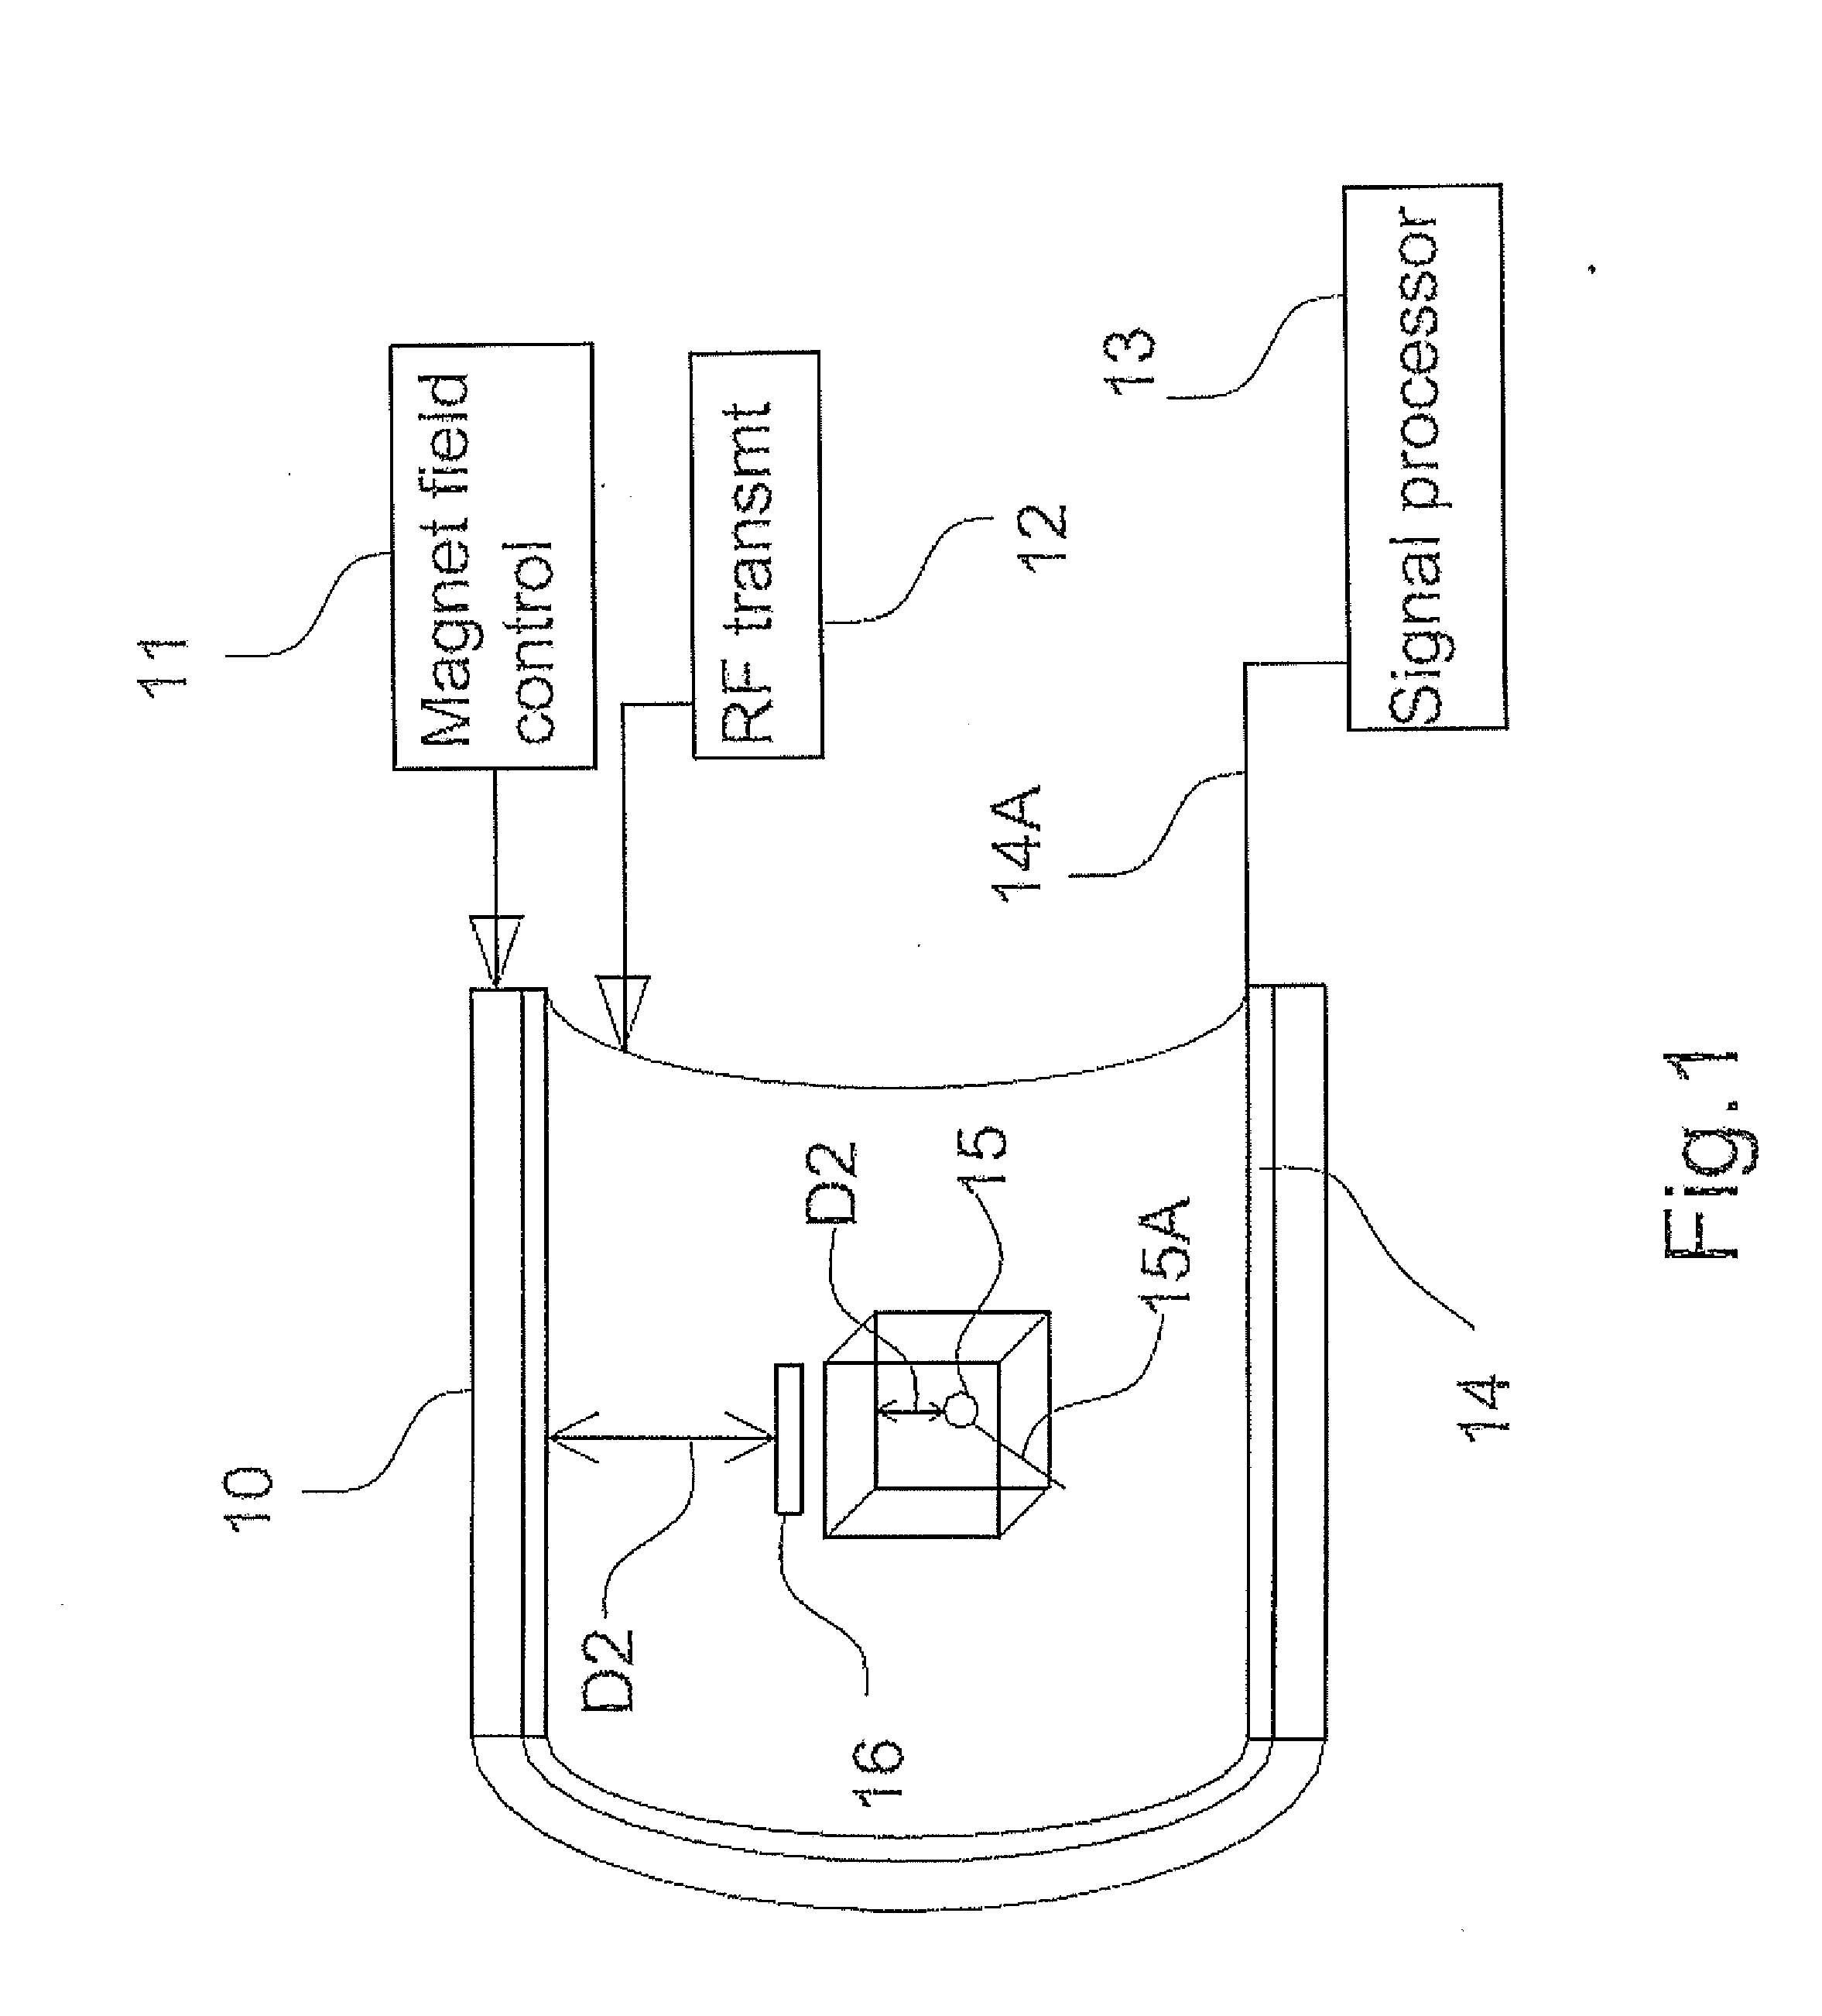 Magnetic Resonance Signal Detection Using Remotely Positioned Receive Coils